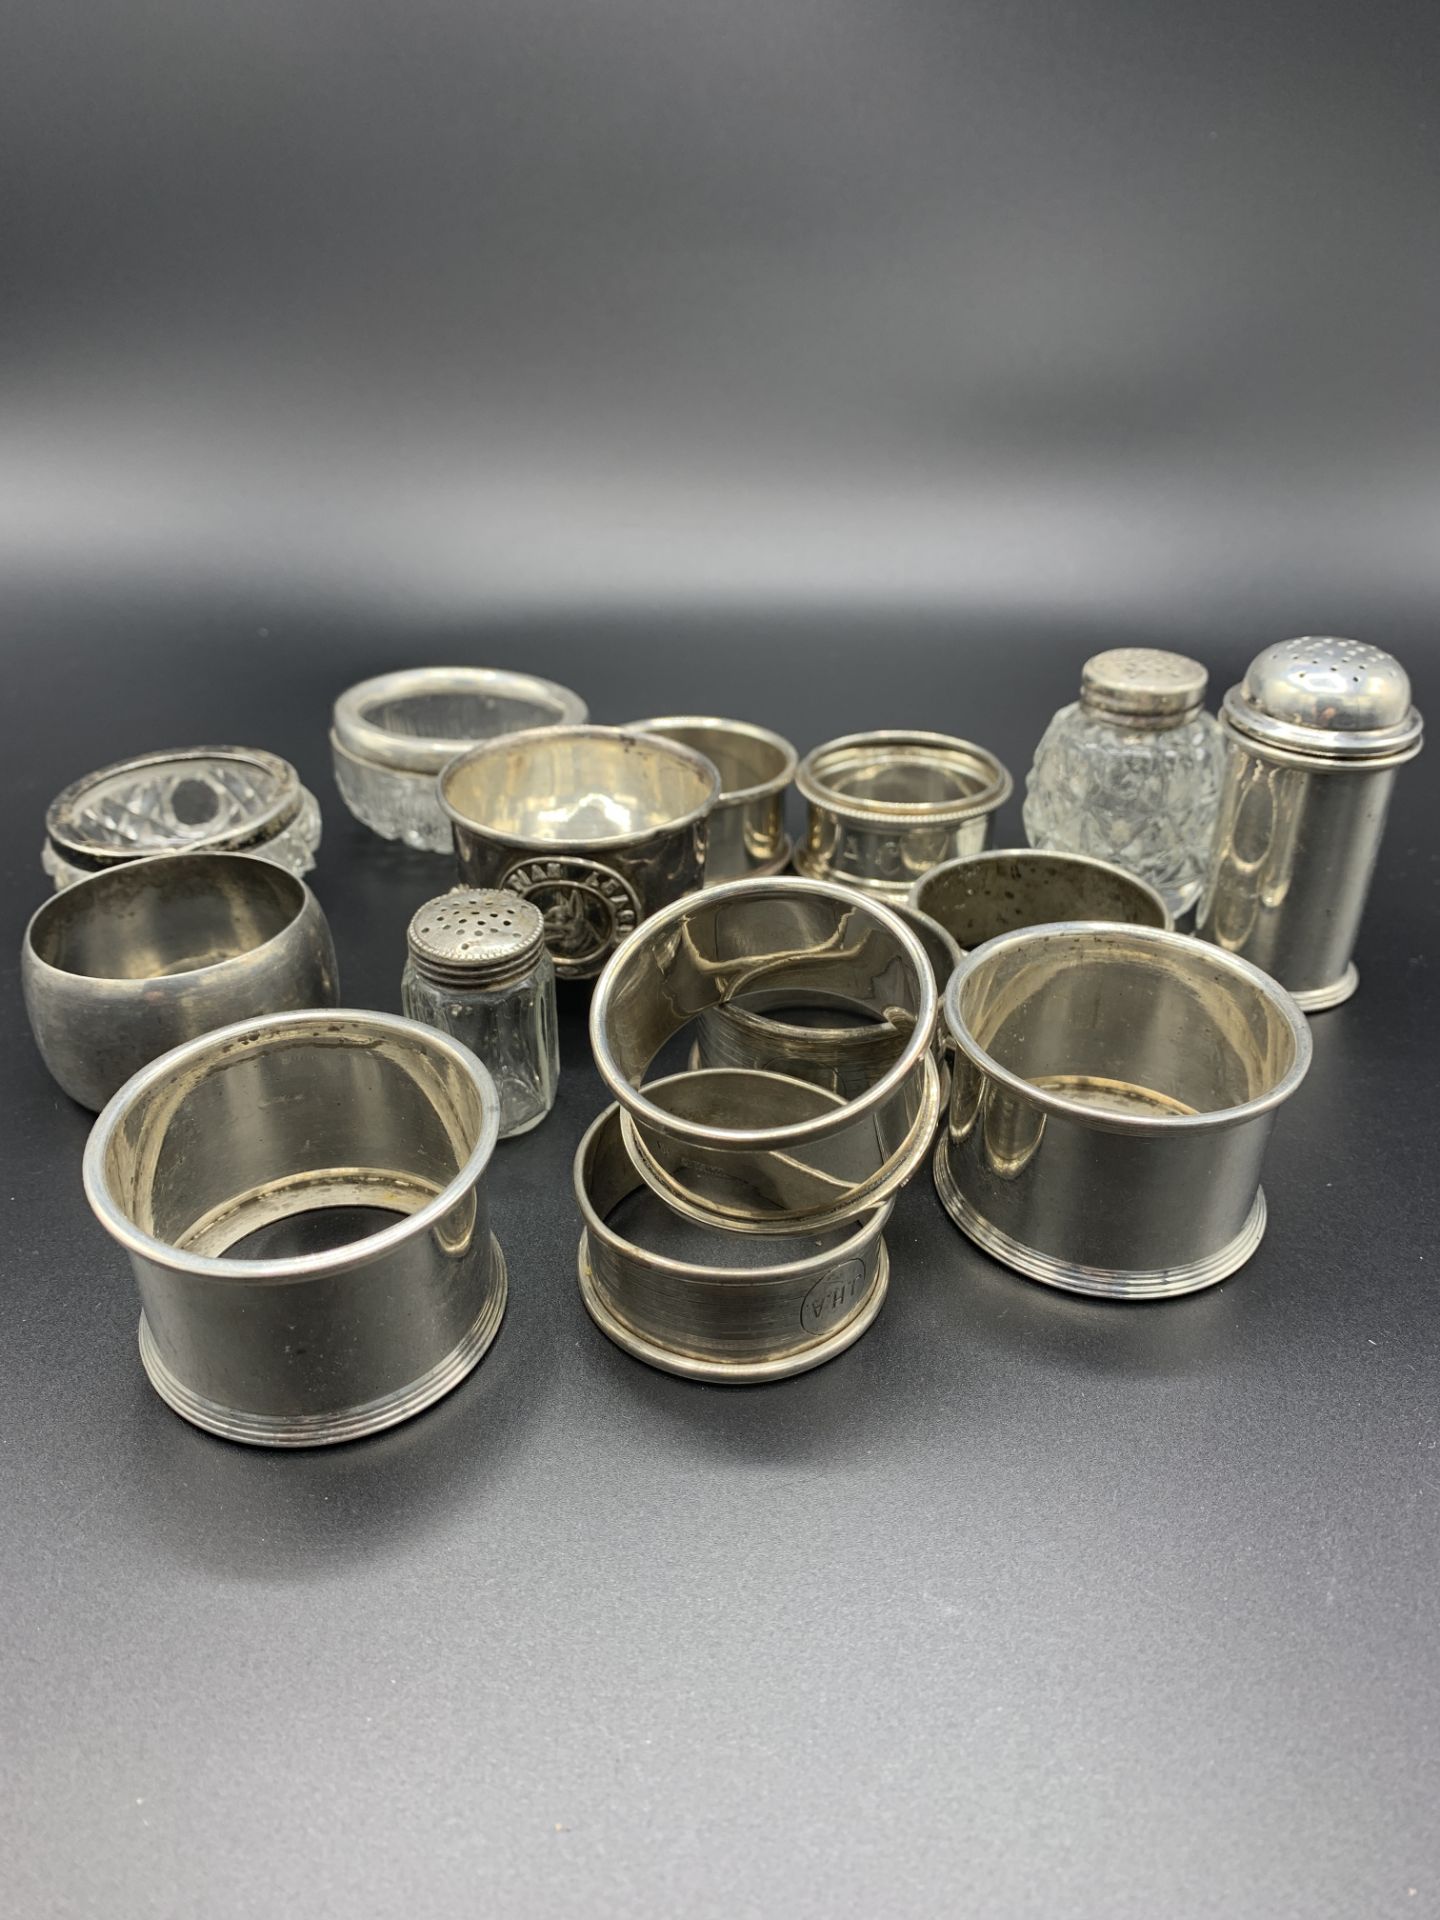 A collection of different sterling silver napkin rings and condiments - Image 2 of 5